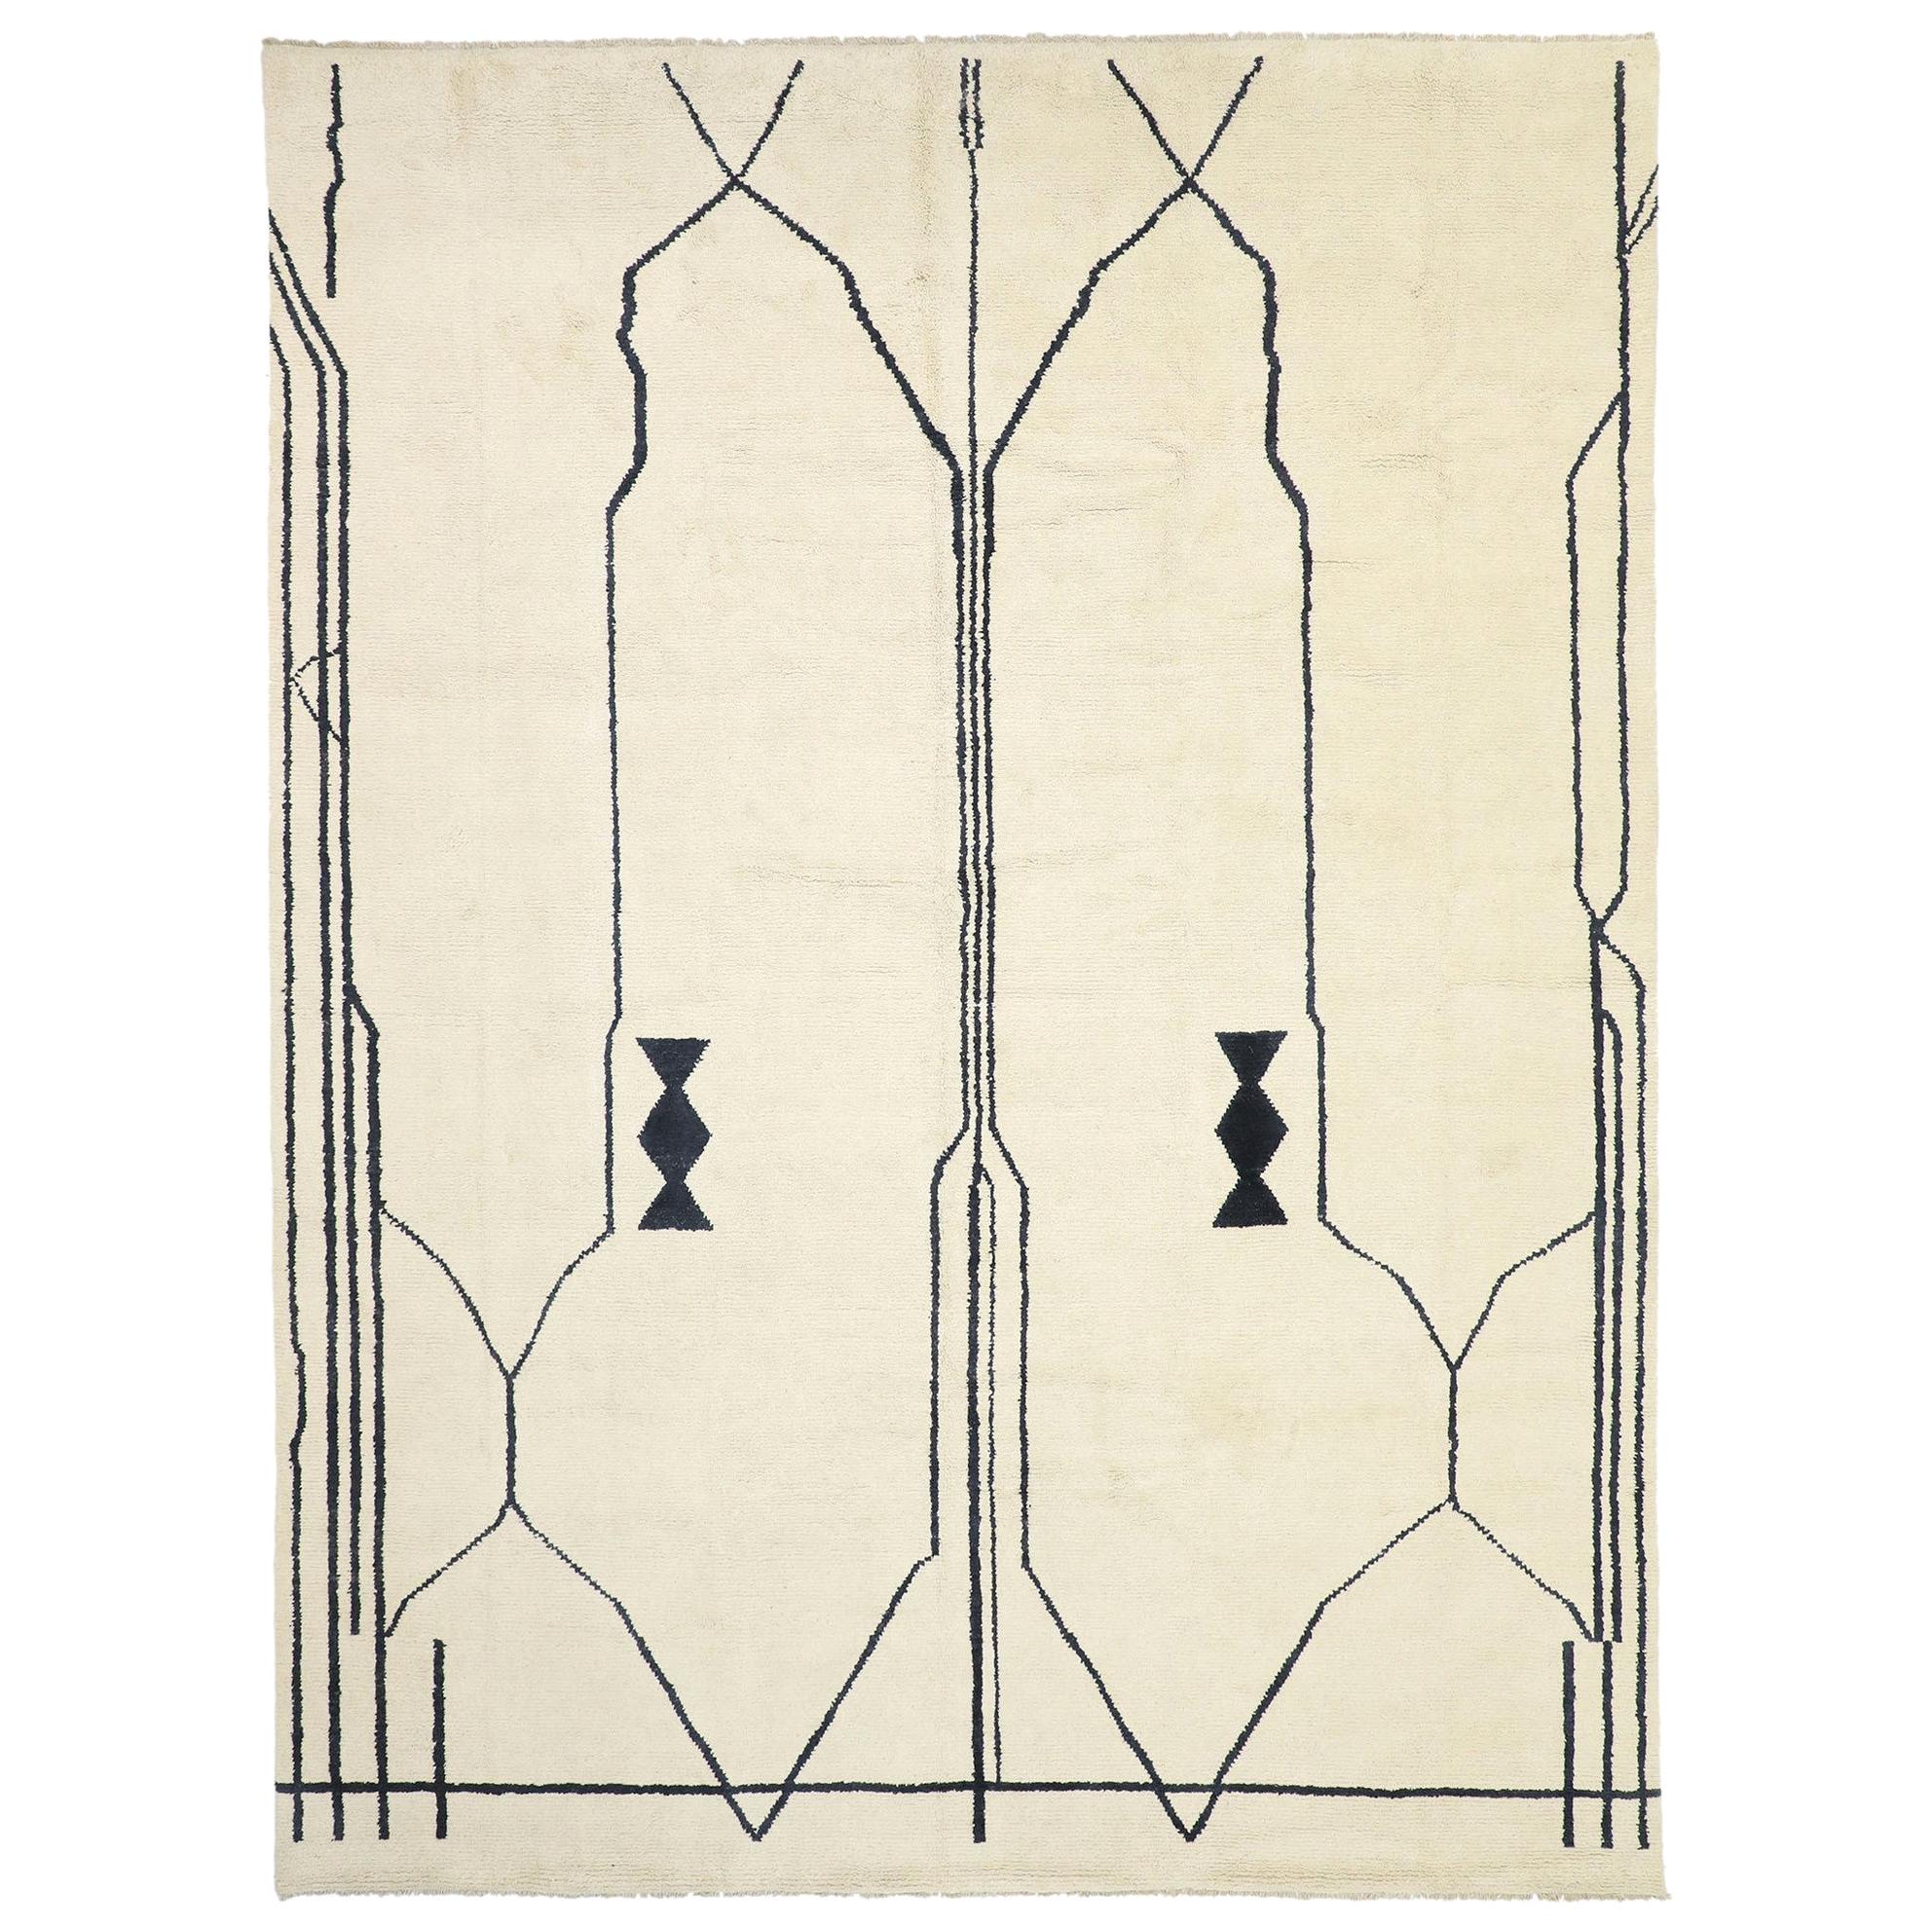 Contemporary Large Moroccan Area Rug with Line Art and Tribal Style